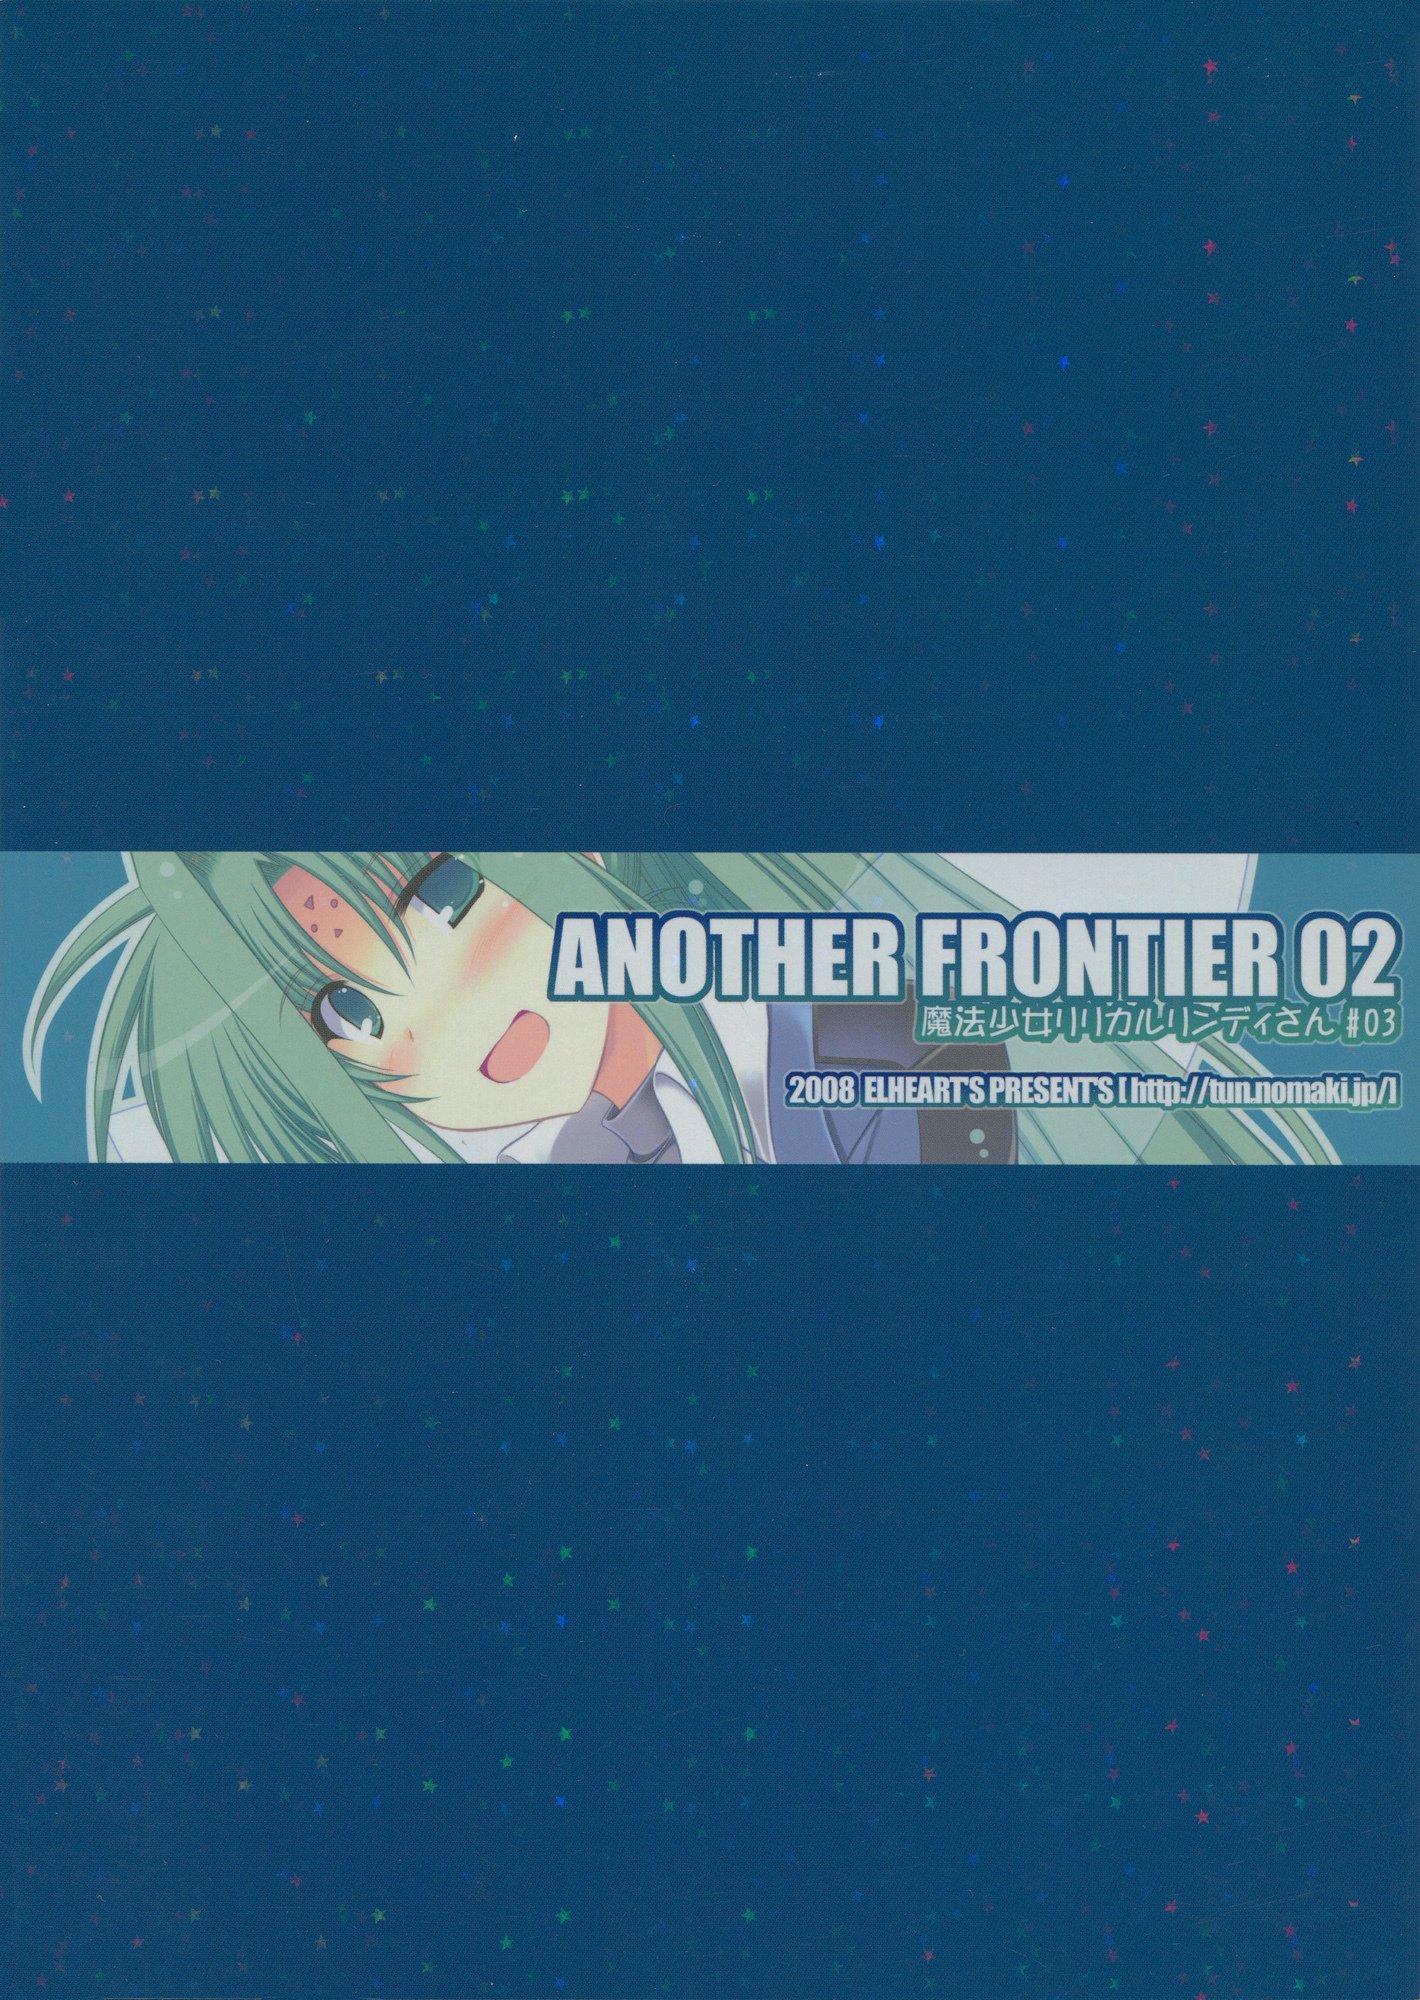 ANOTHER FRONTIER 02魔法少女リリカルリンディさん＃03